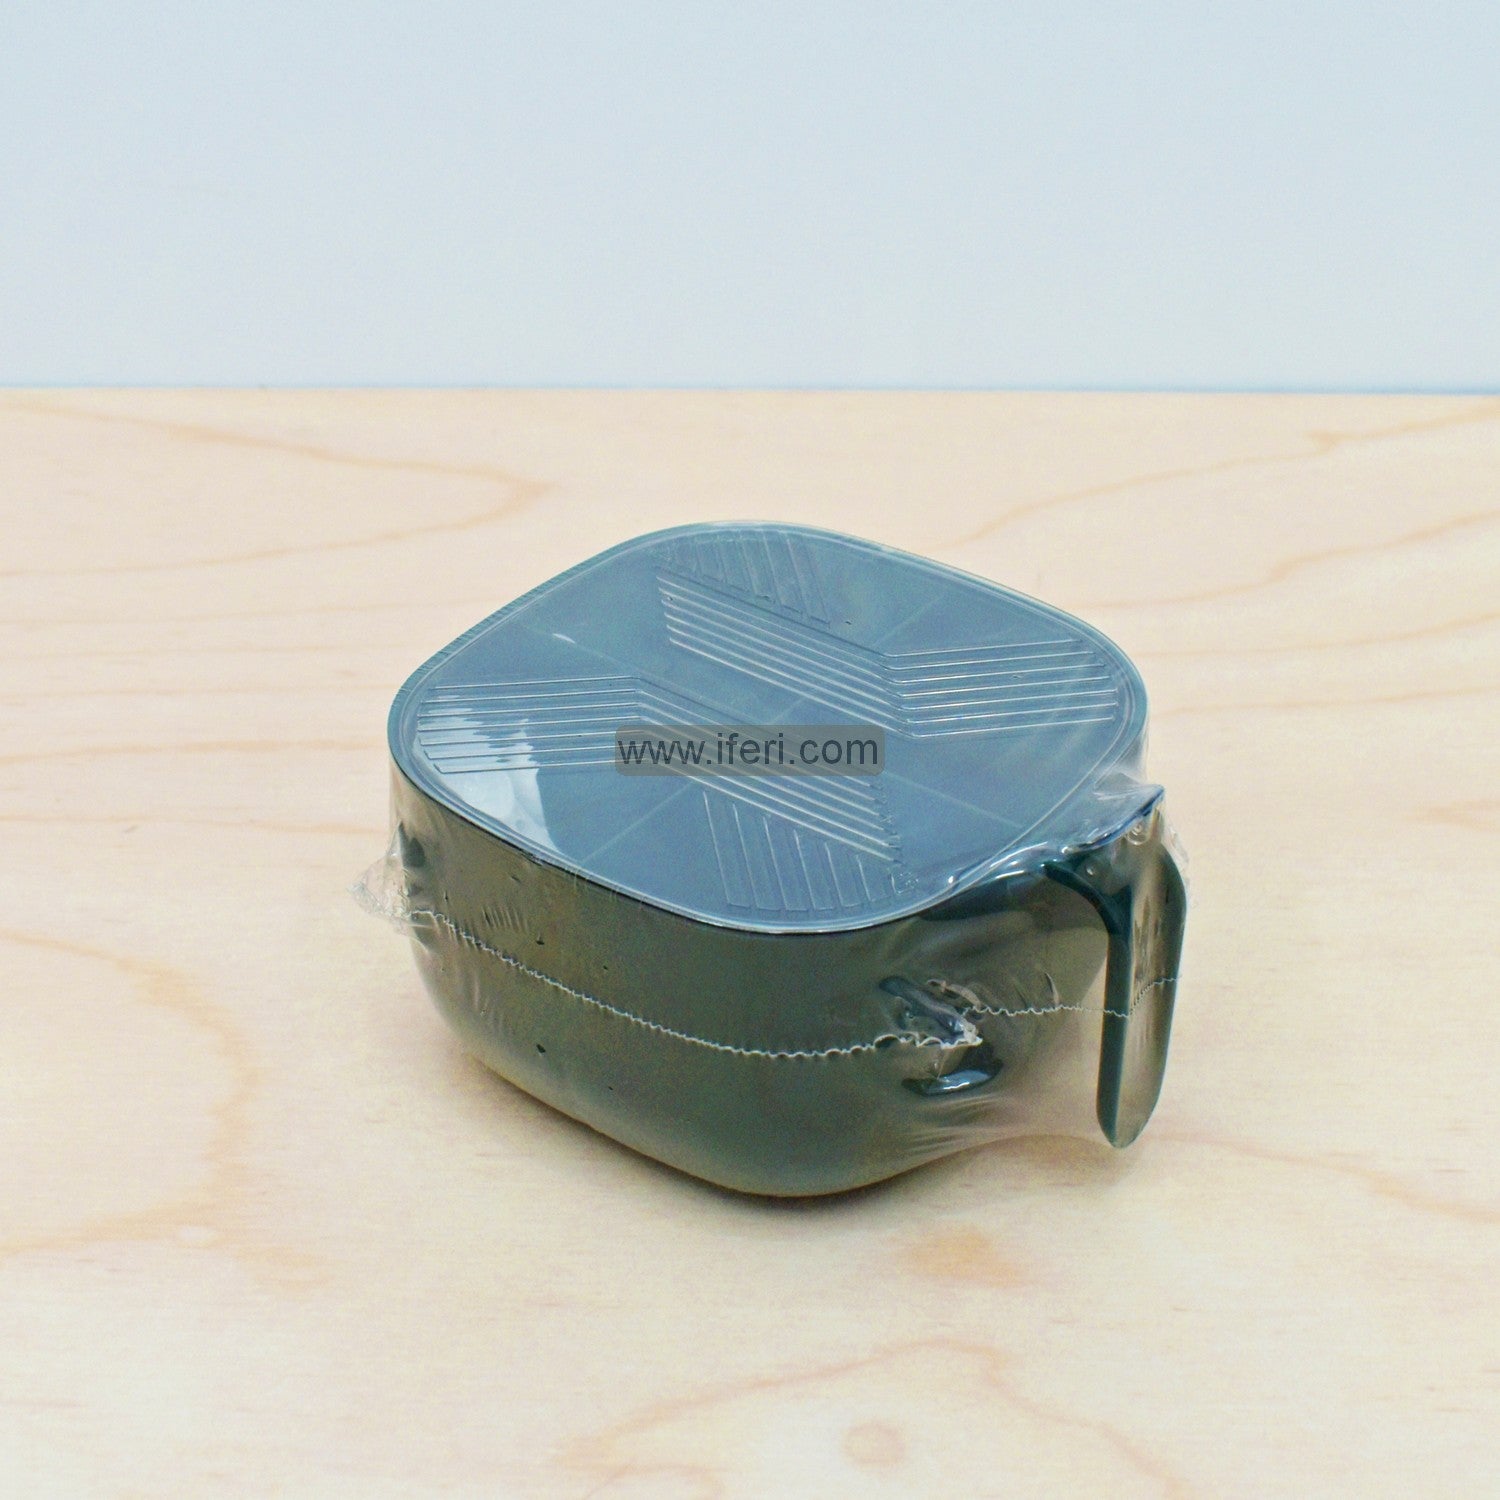 Buy Spice Box Container through online from iferi.com in Bangladesh